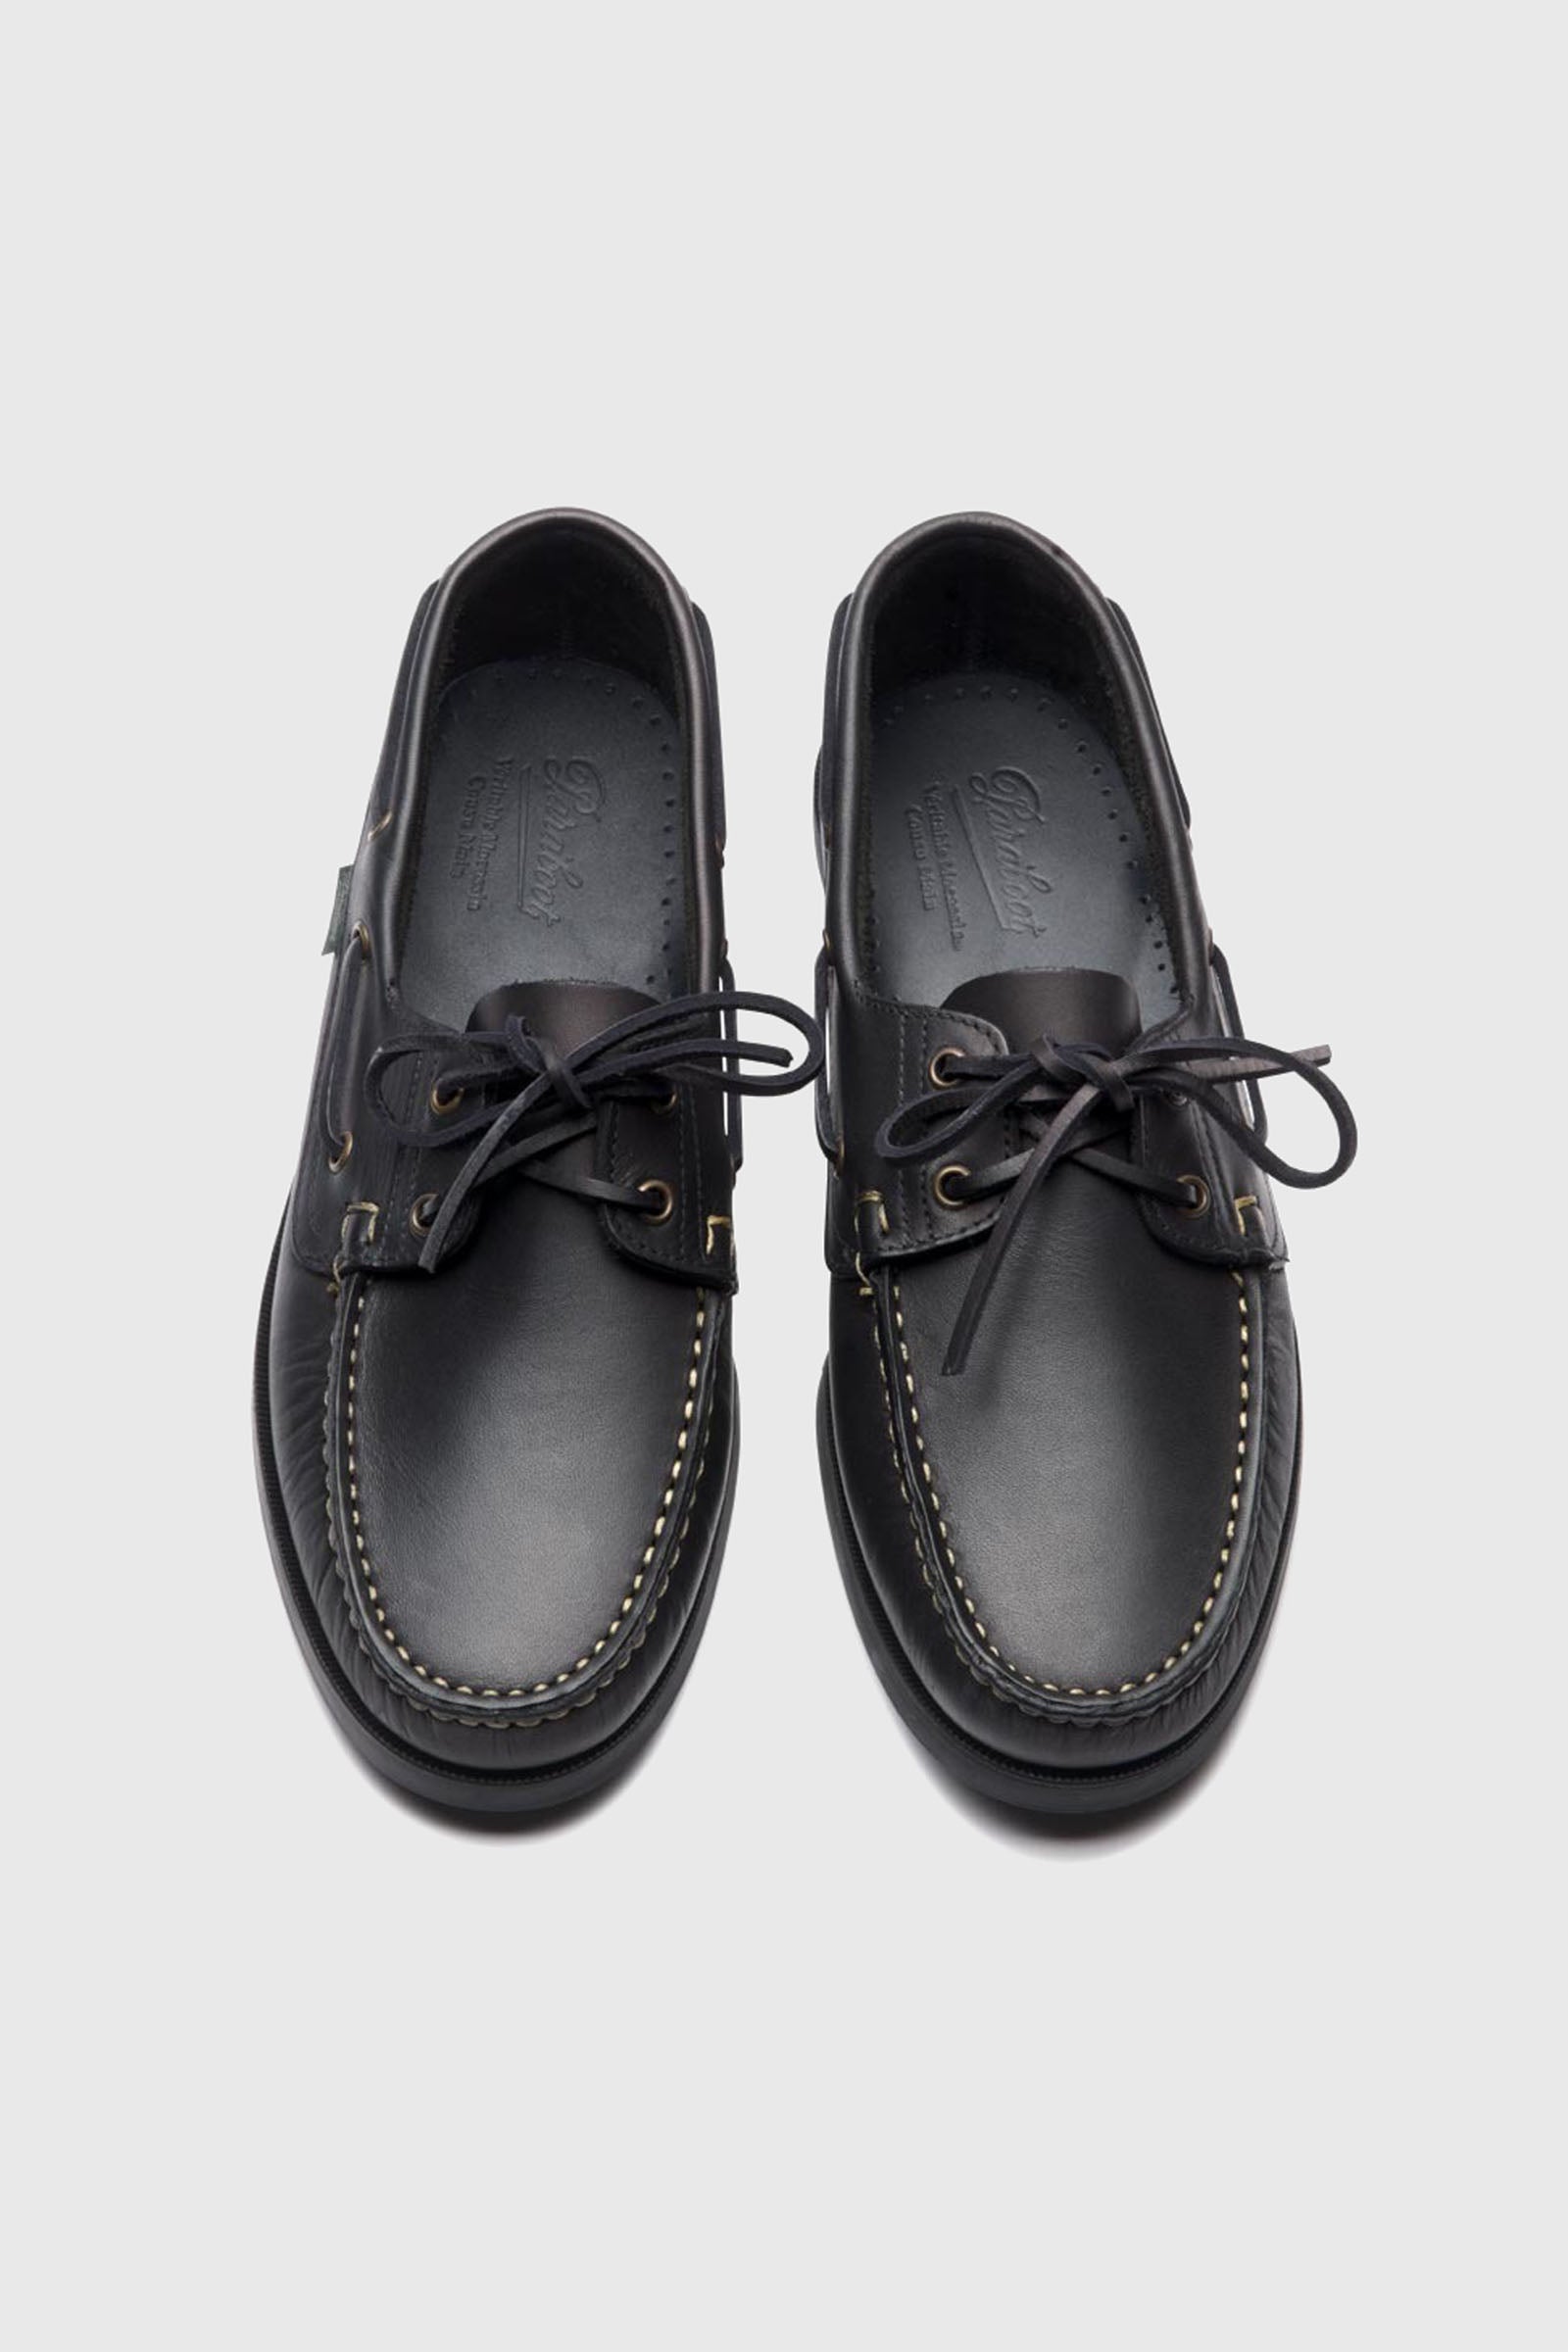 Paraboot Loafer Barth Leather Black - 4